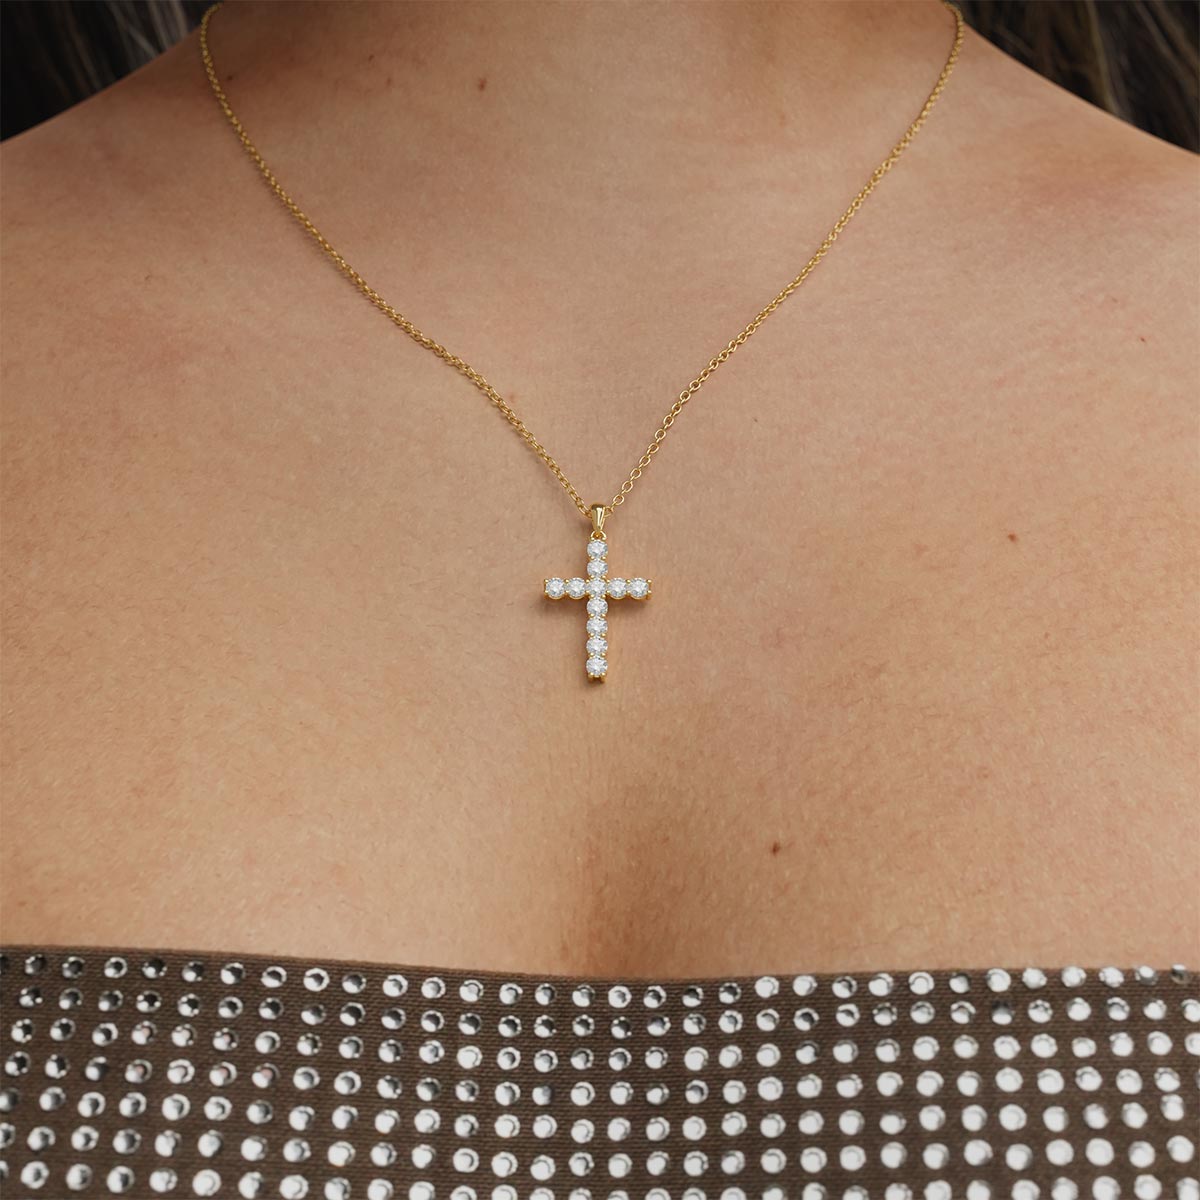 Standard Size Pavé Cross With 3mm Stones